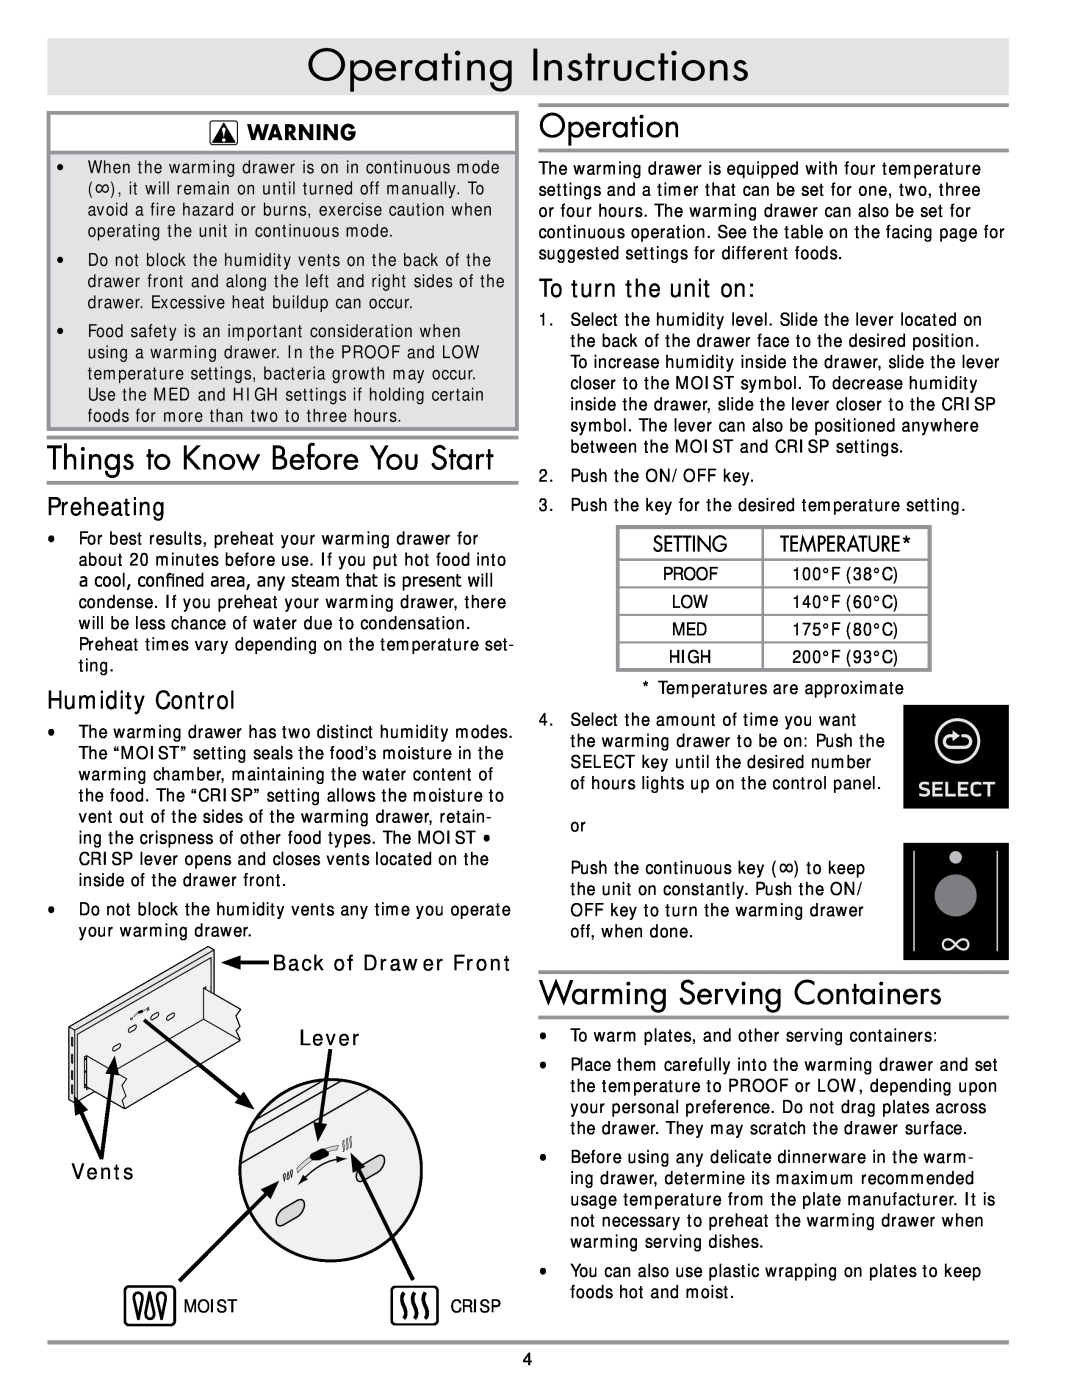 Dacor PWD30 Operating Instructions, Preheating, Humidity Control, To turn the unit on, Back of Drawer Front Lever Vents 